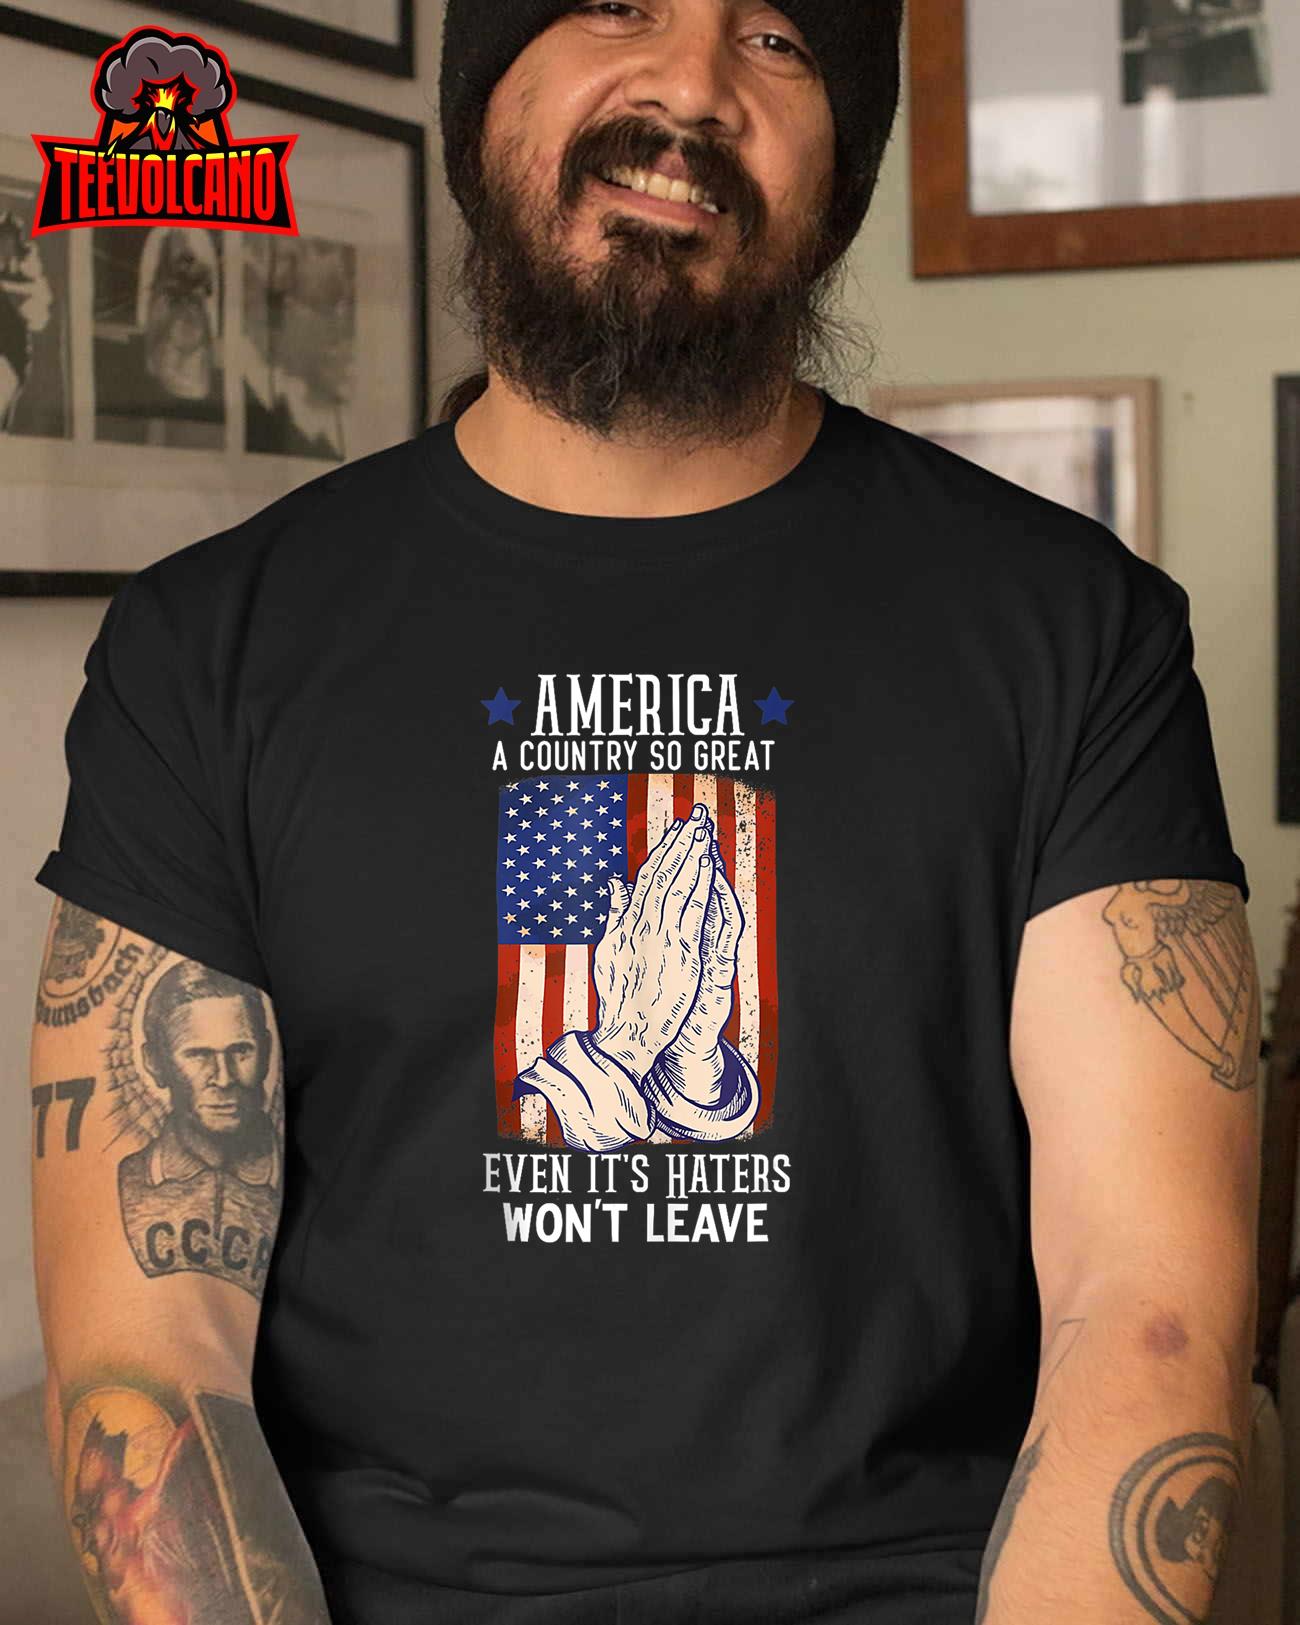 America A Country So Great Even It's Haters Won't Leave T-Shirt